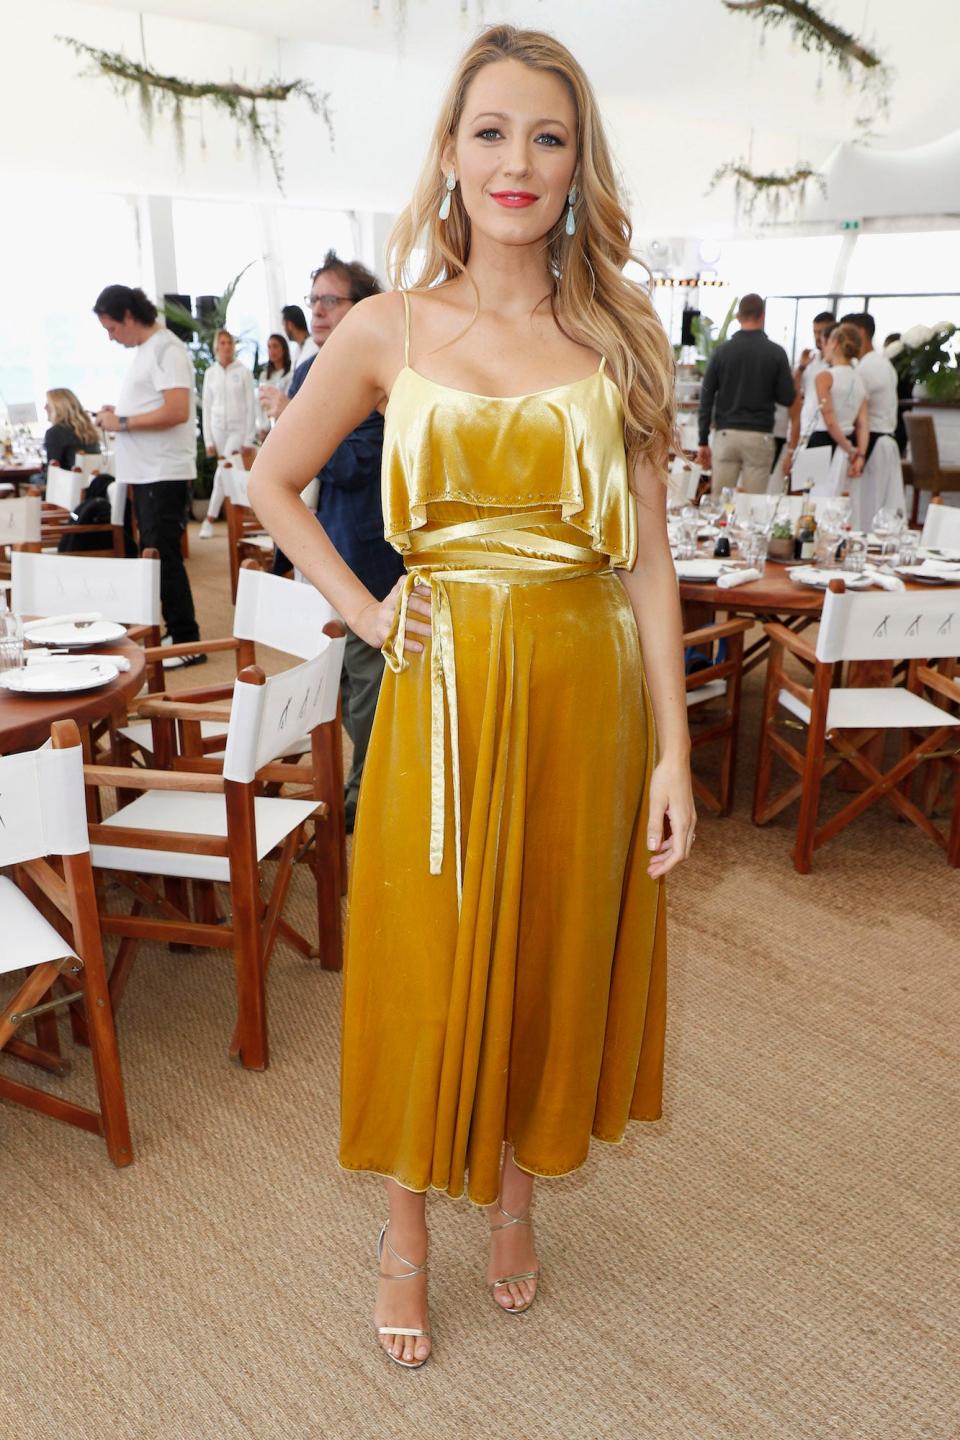 Blake Lively attends a "Cafe Society" press lunch during the 2016 Cannes Film Festival.